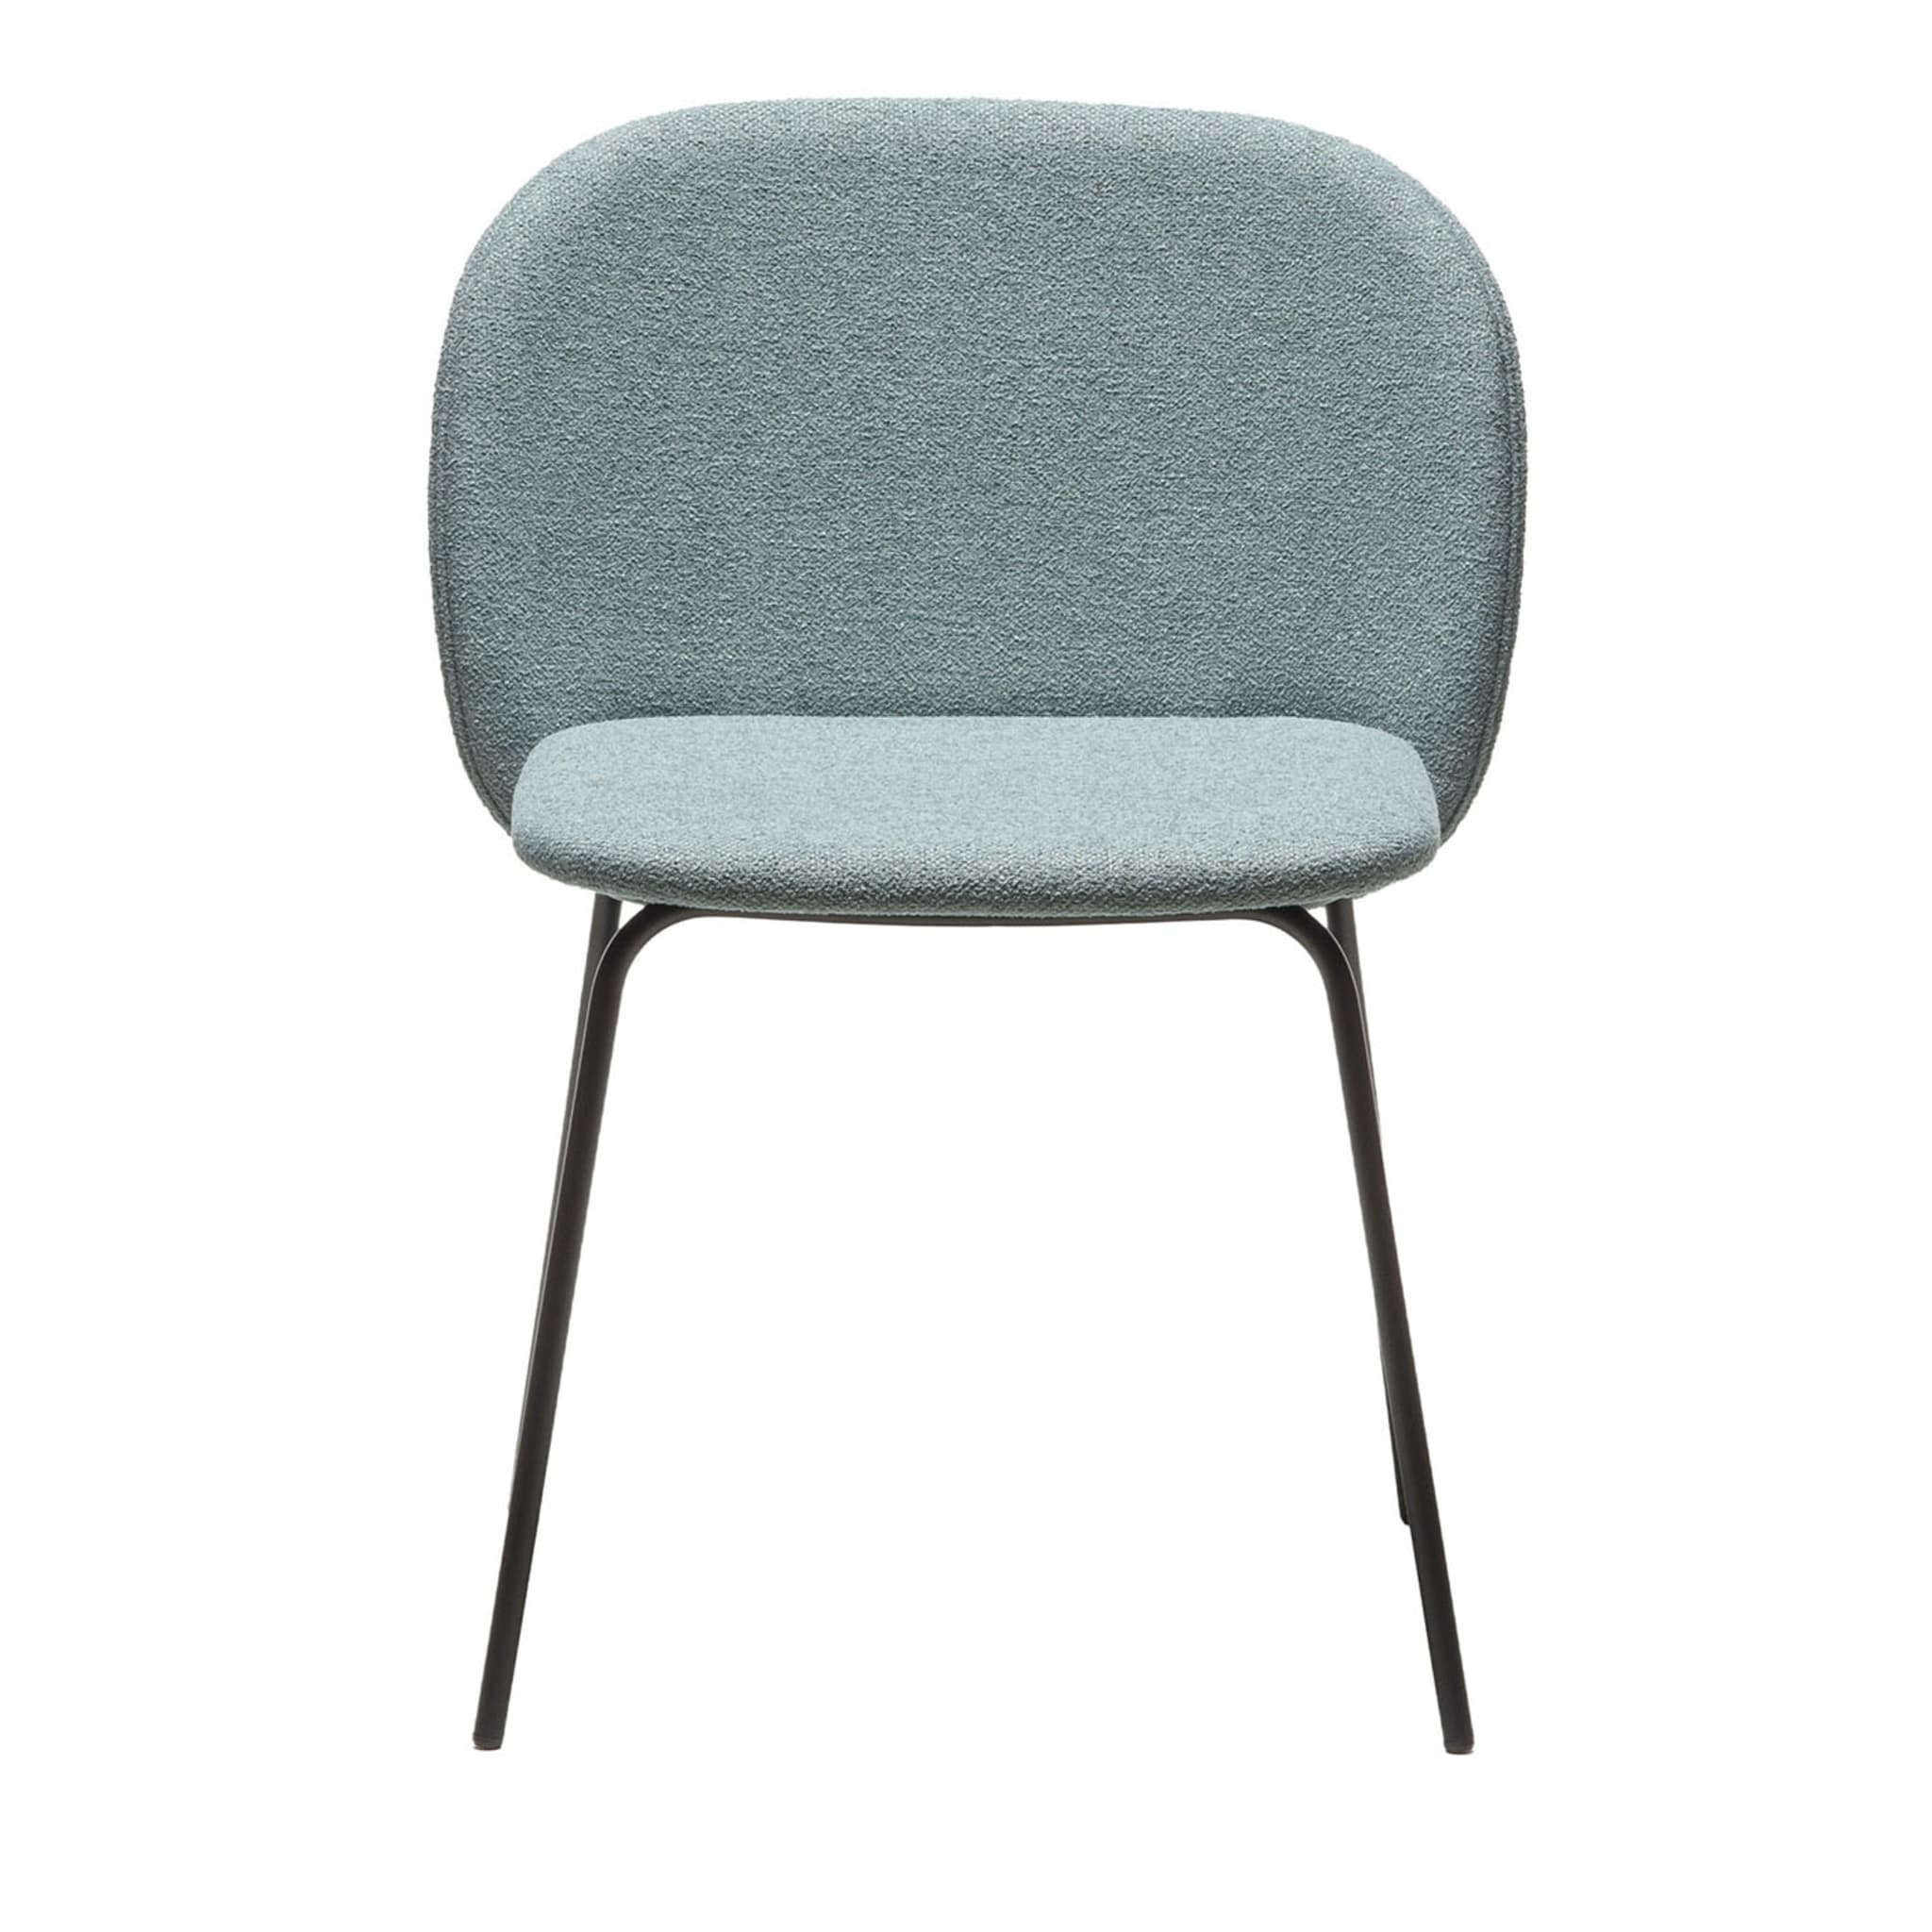 Chips M Light Blue Chair By Studio Pastina - Main view